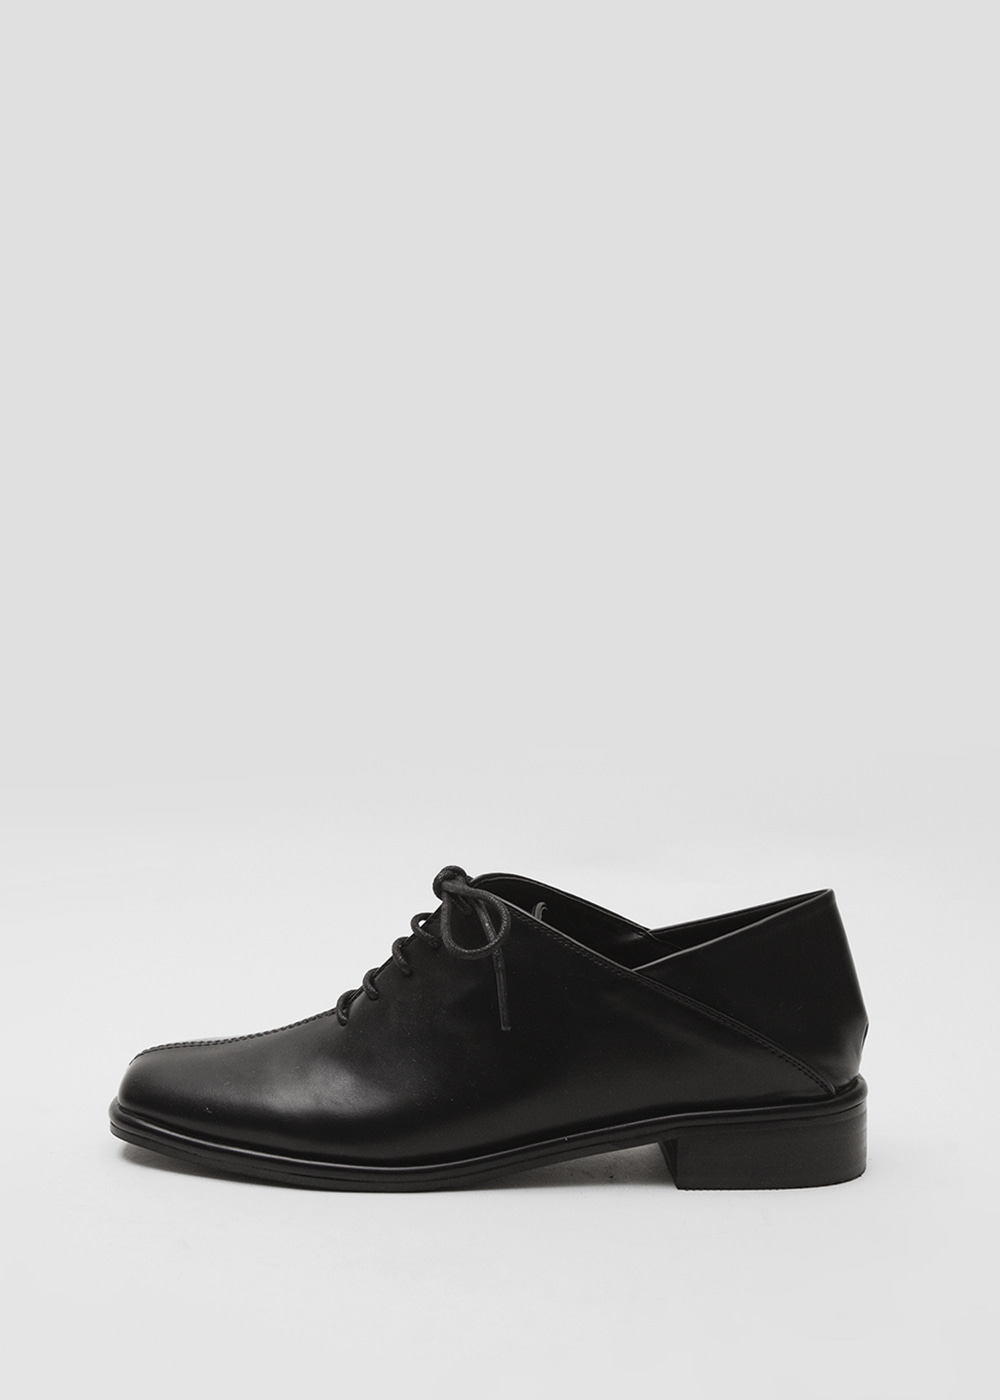 Square 2way string loafer